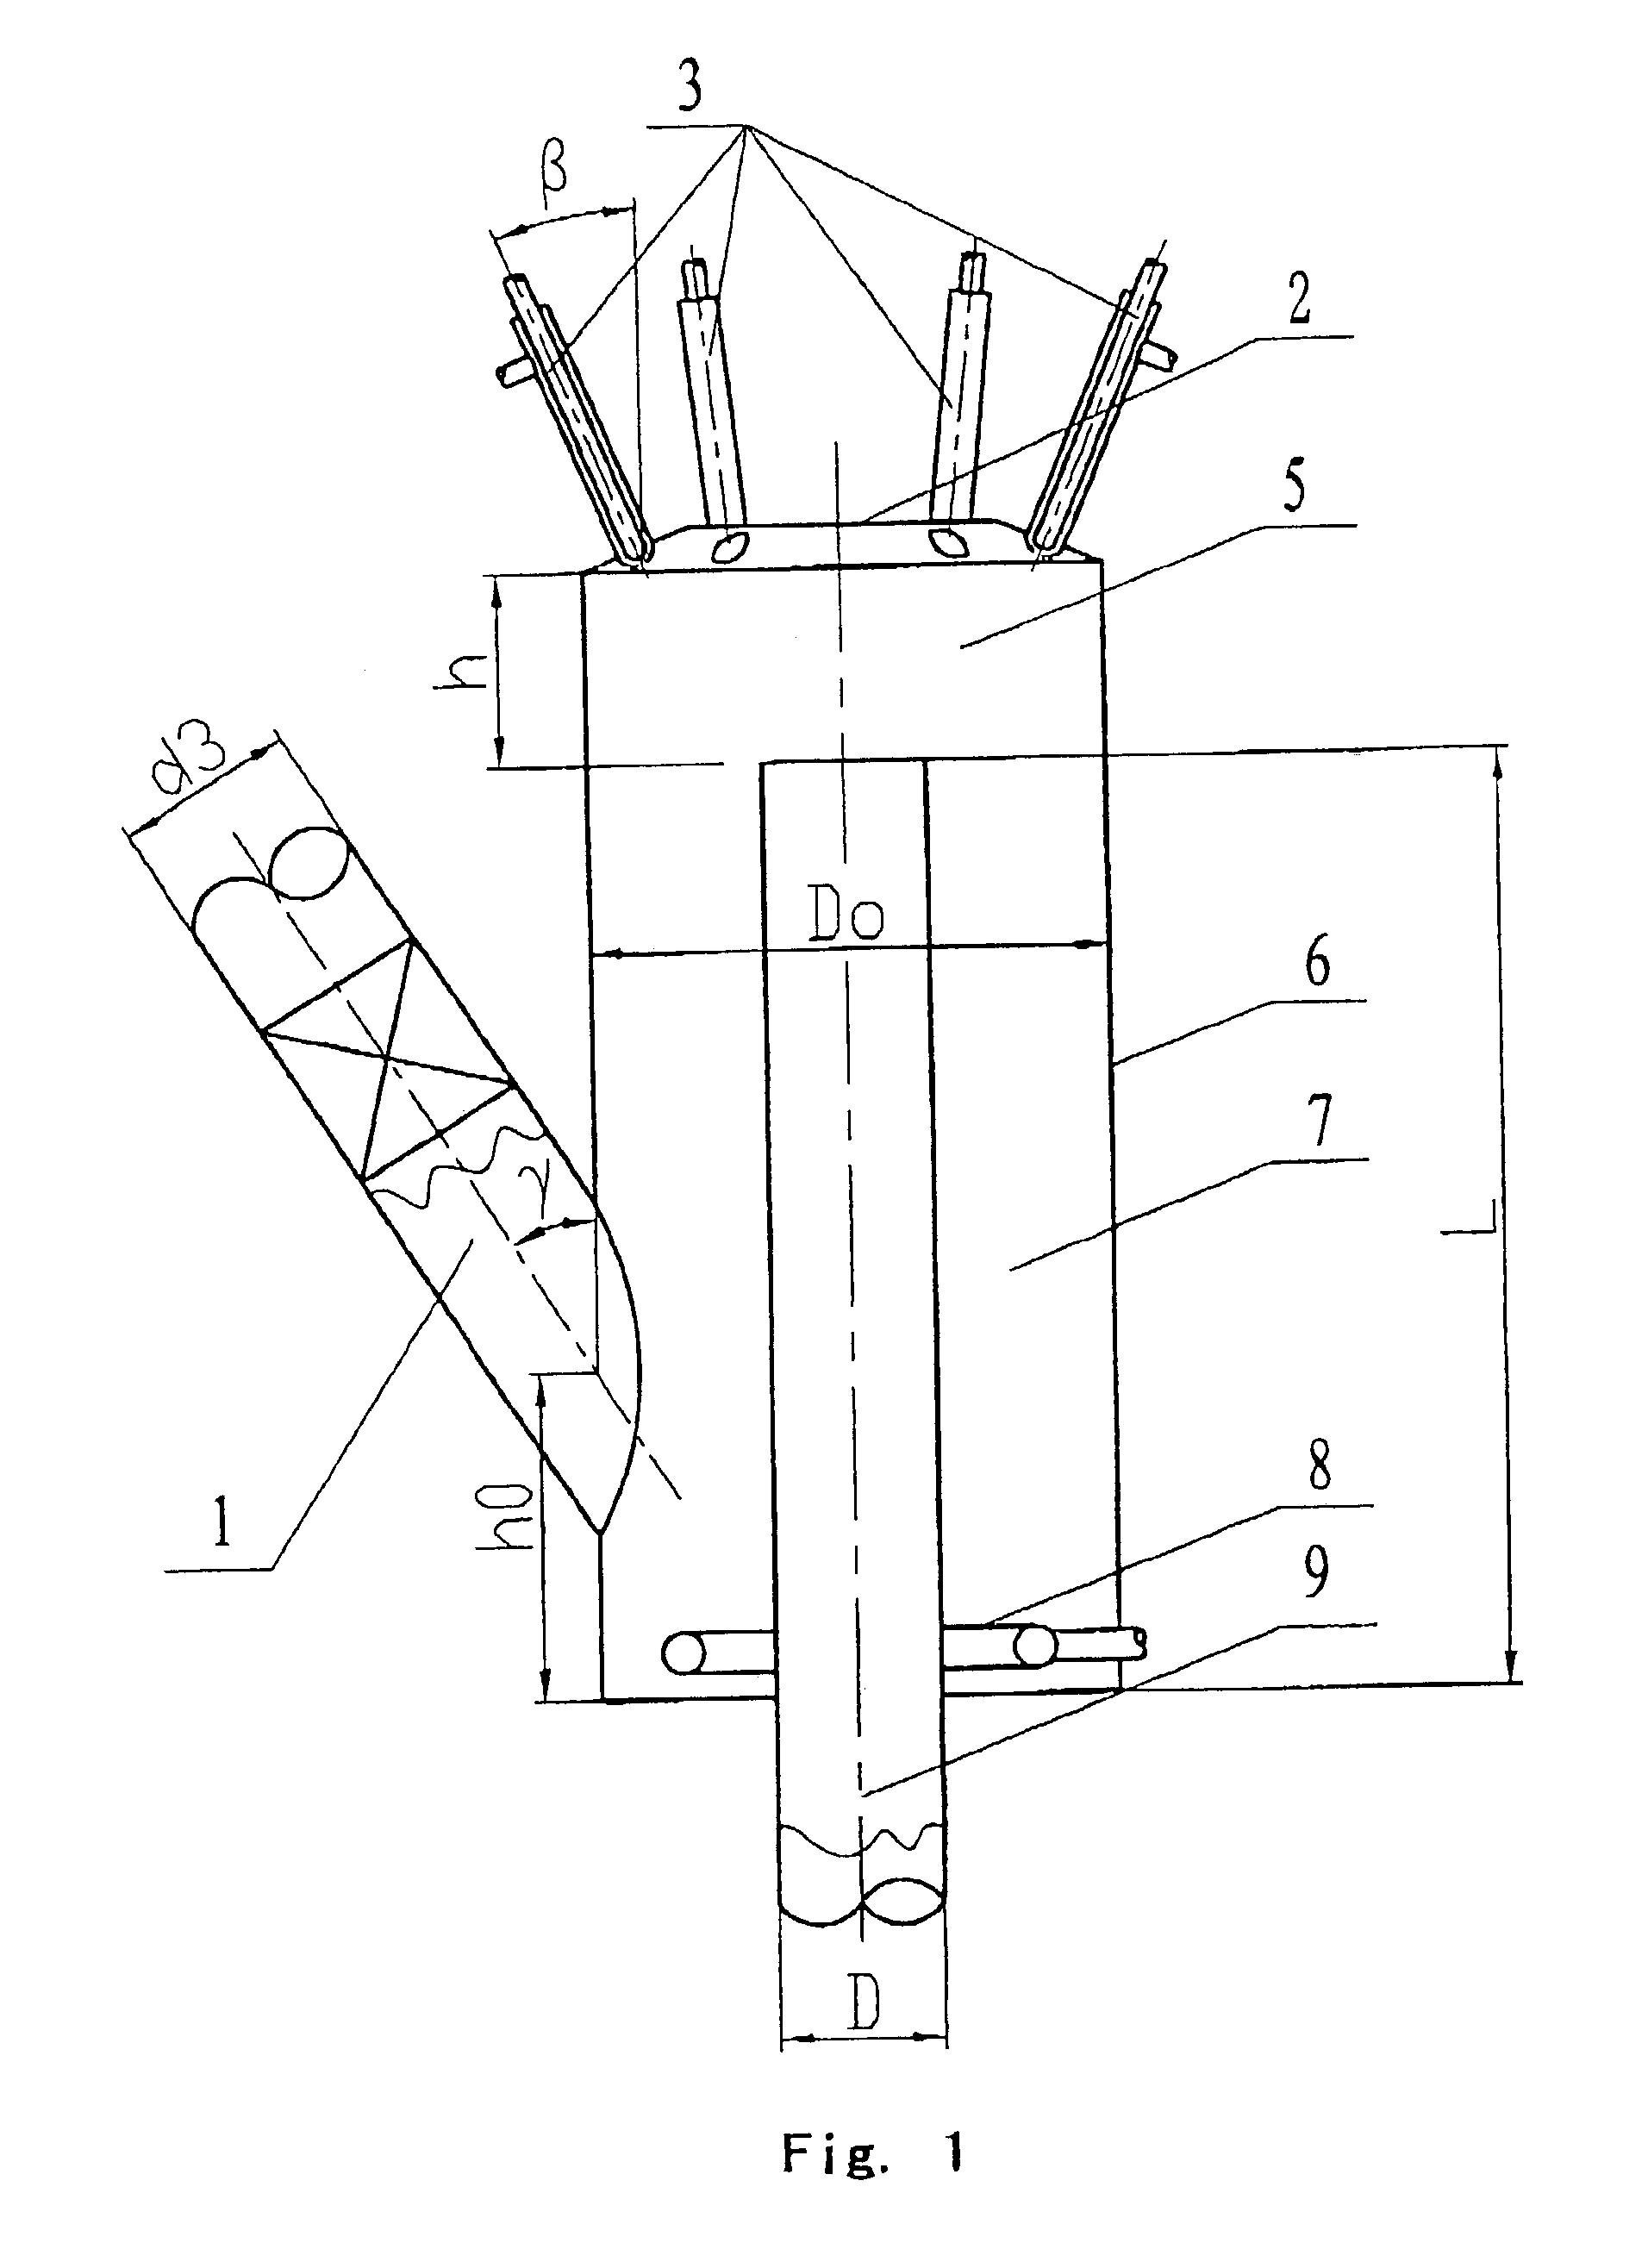 Downflow catalytic cracking reactor and its application